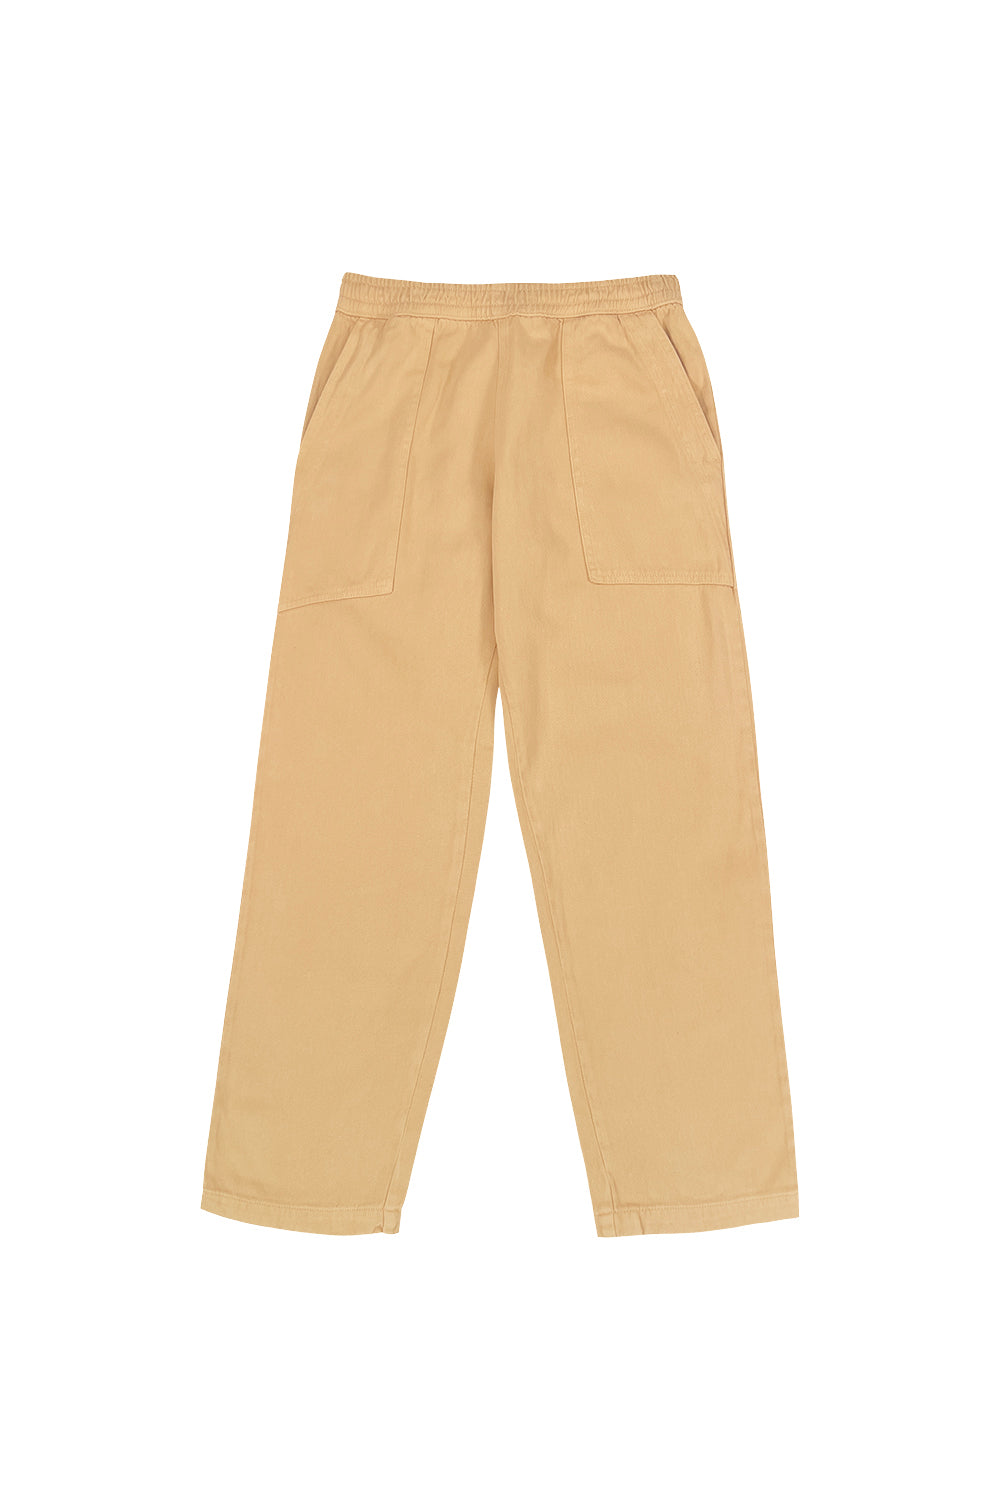 Jungmaven hemp and cotton twill ocean pants sustainably made in Los Angeles.